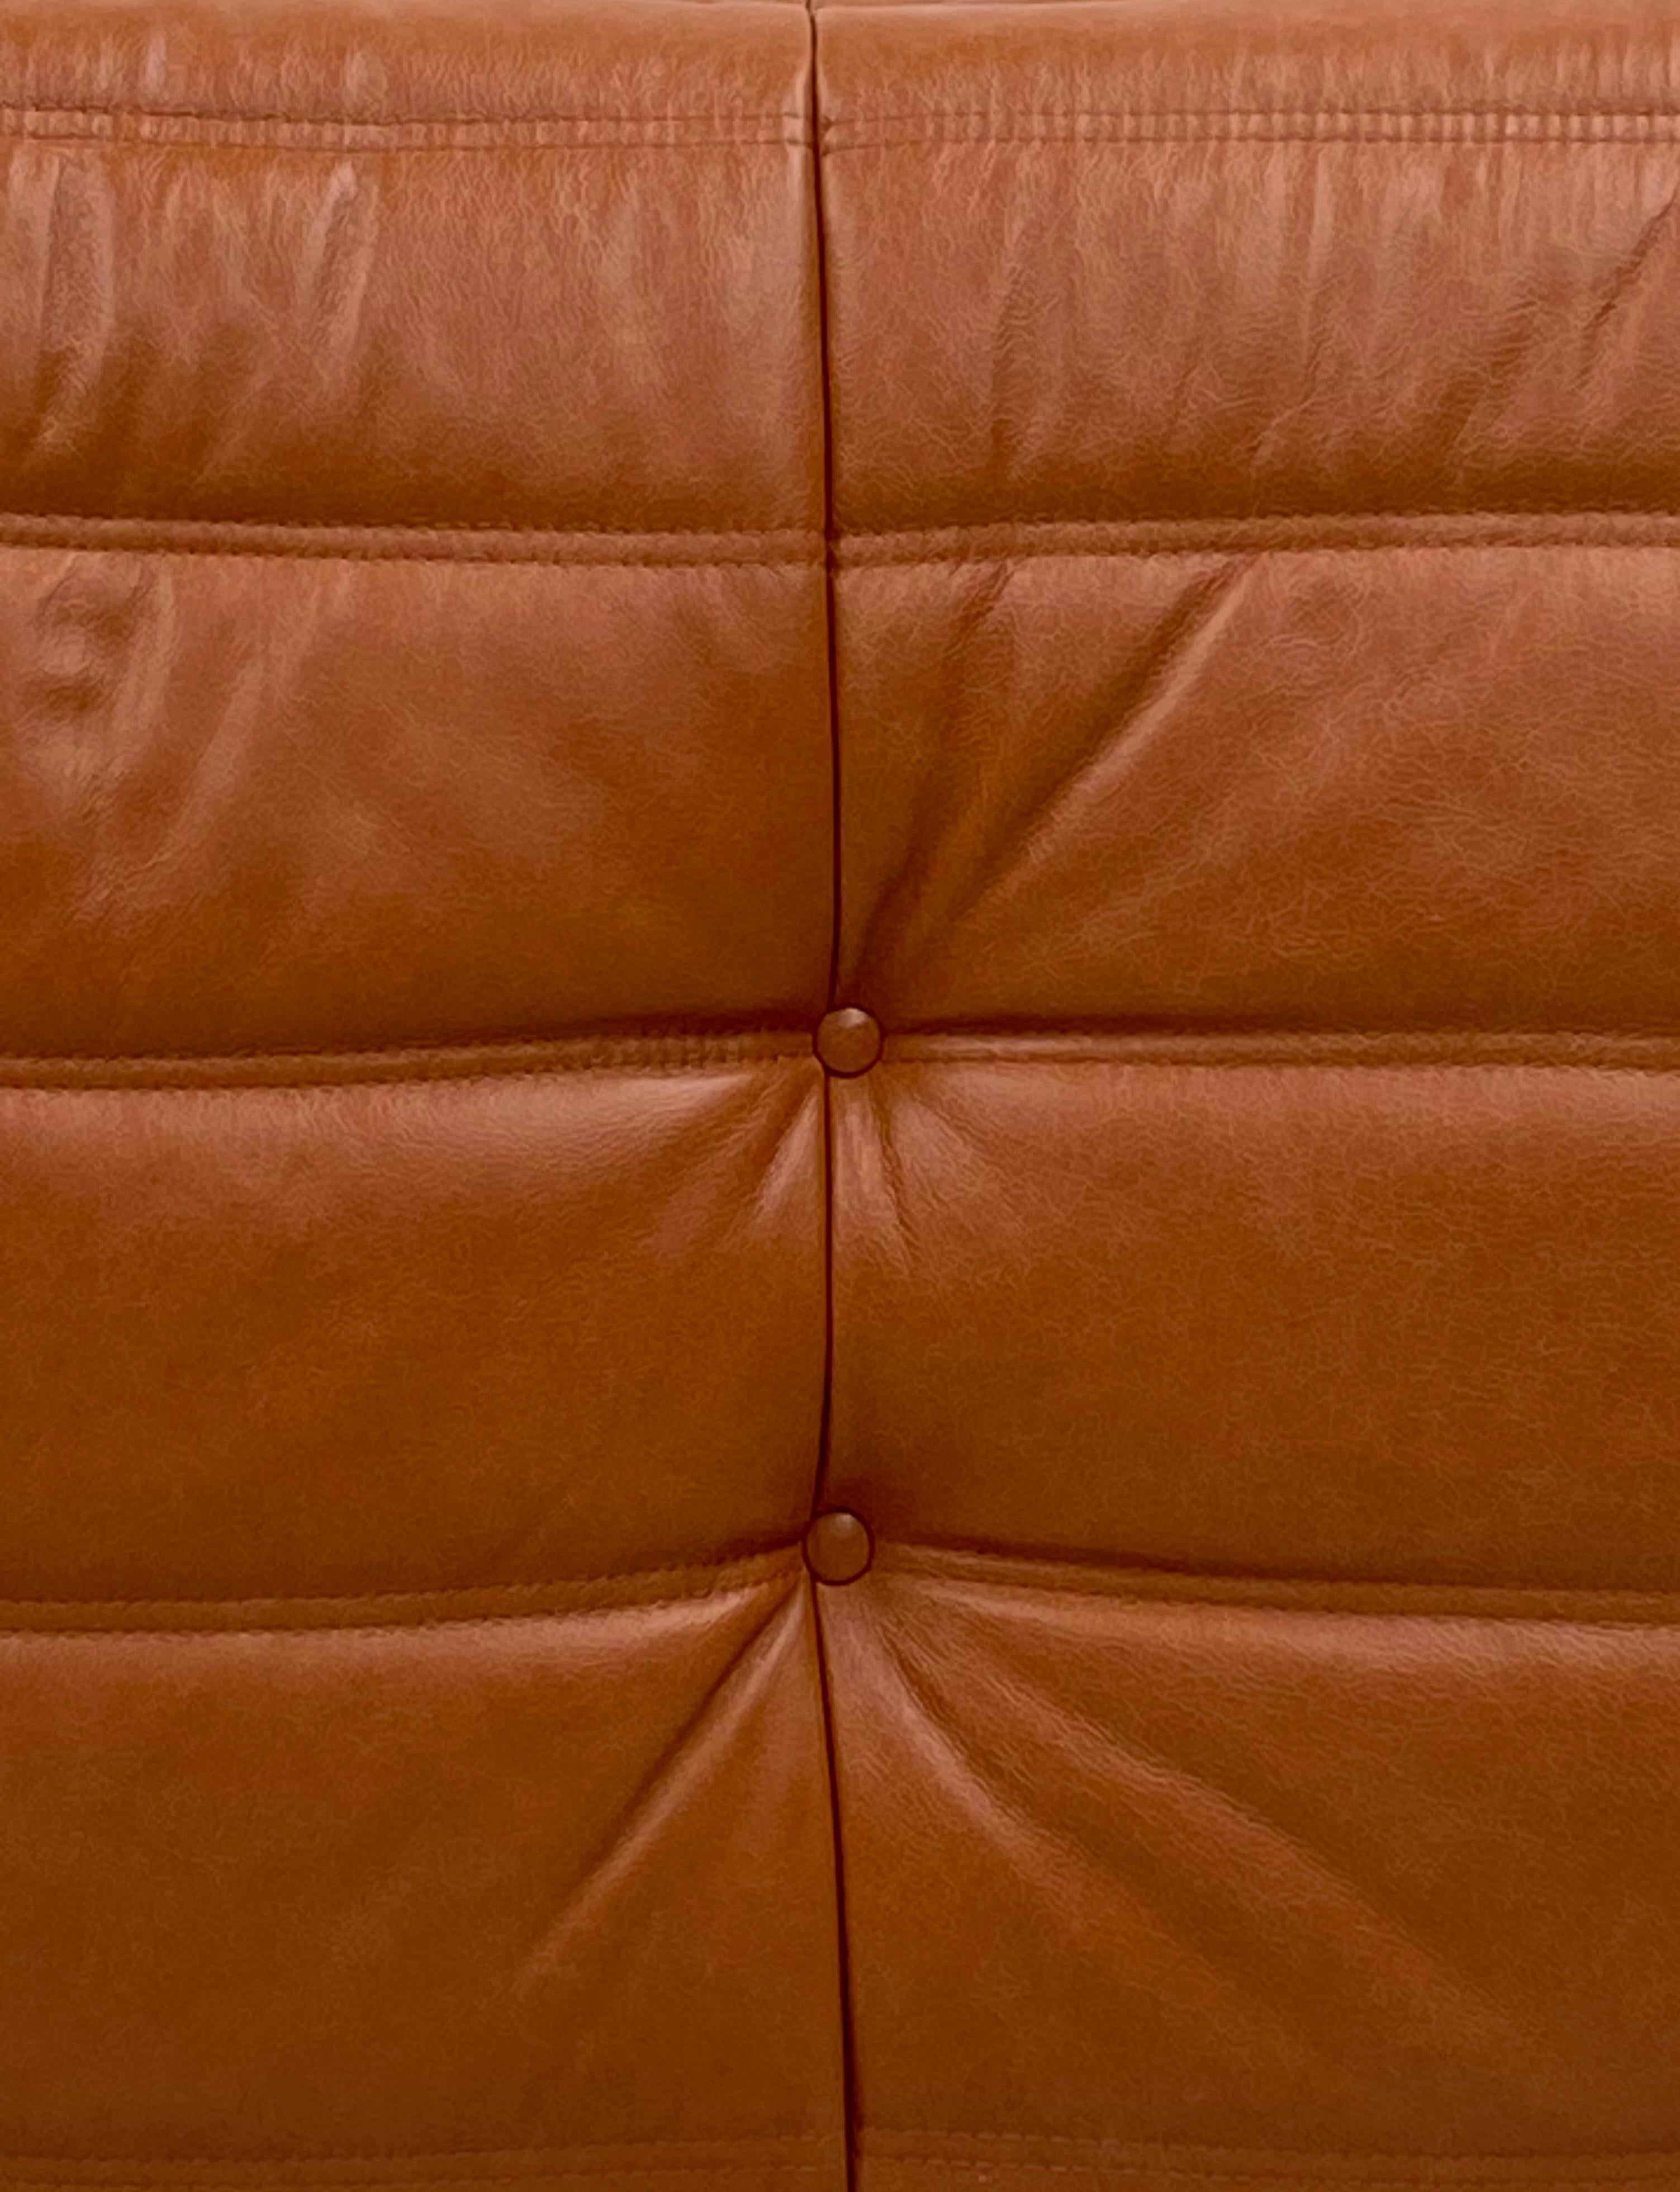 Mid-Century Modern French Vintage Togo Chair in Brown Leather by Michel Ducaroy for Ligne Roset.